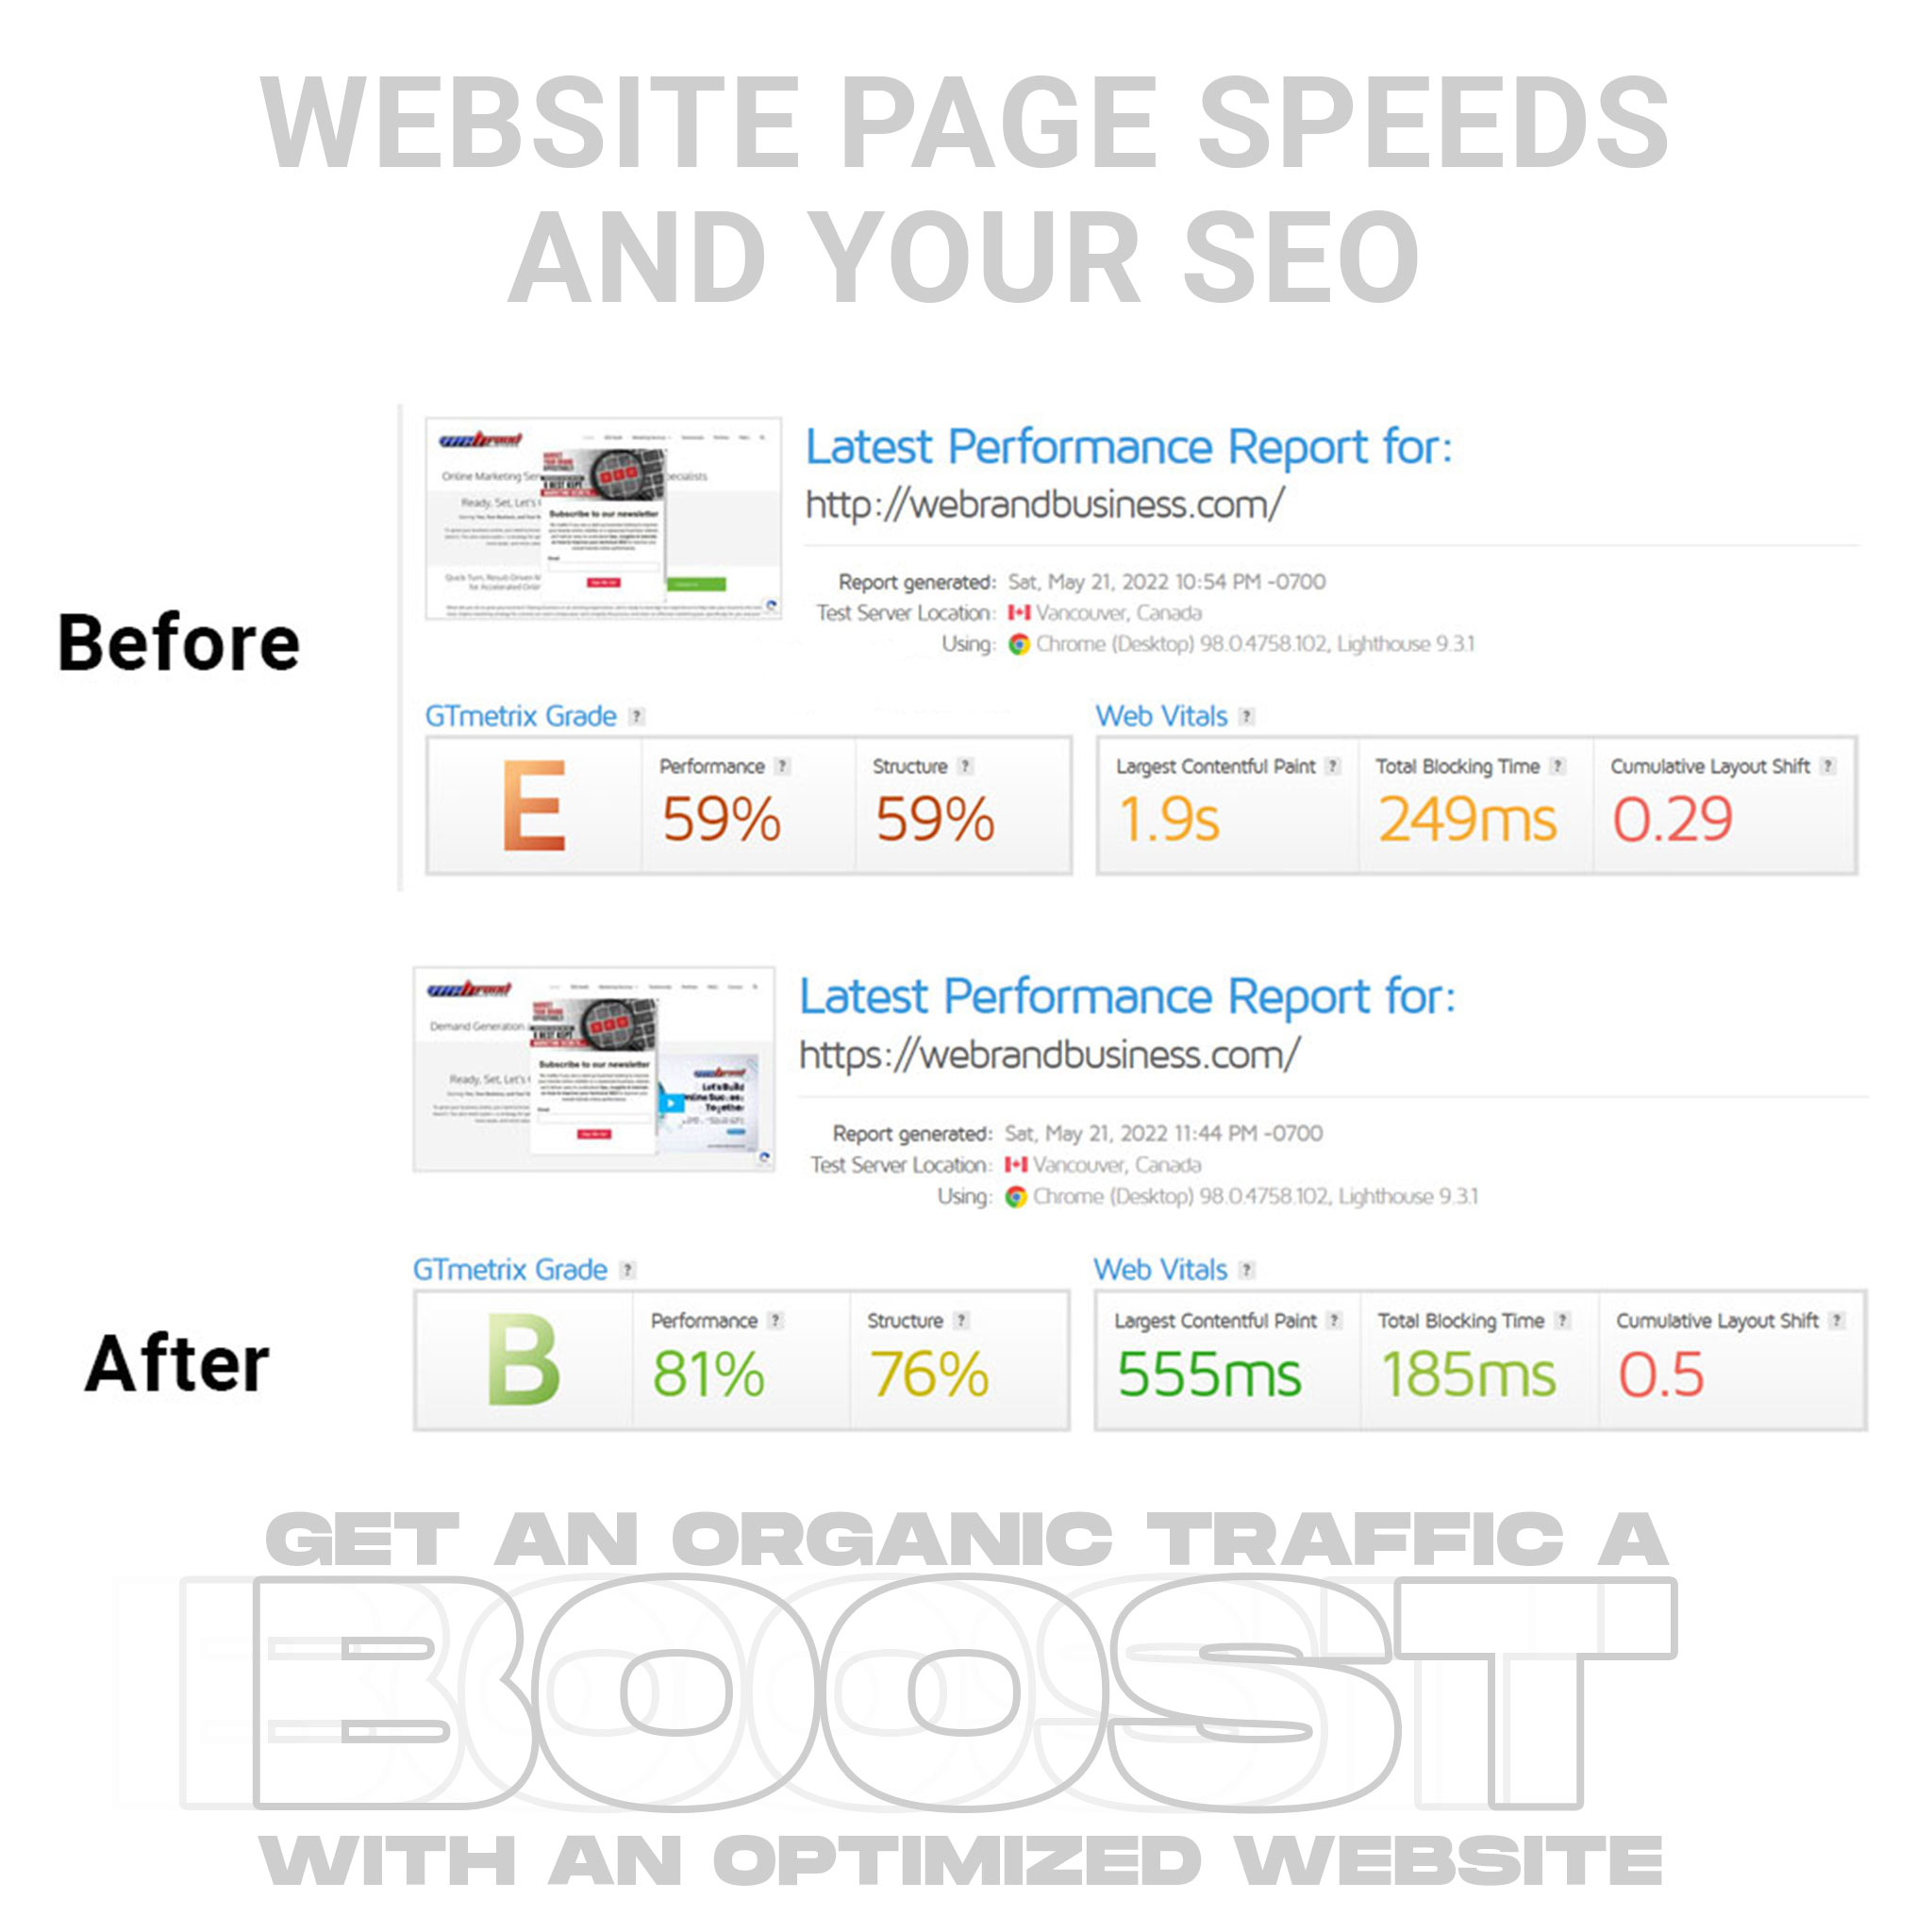 Website Page Speed and Performance Improvements for a Boost in your SEO